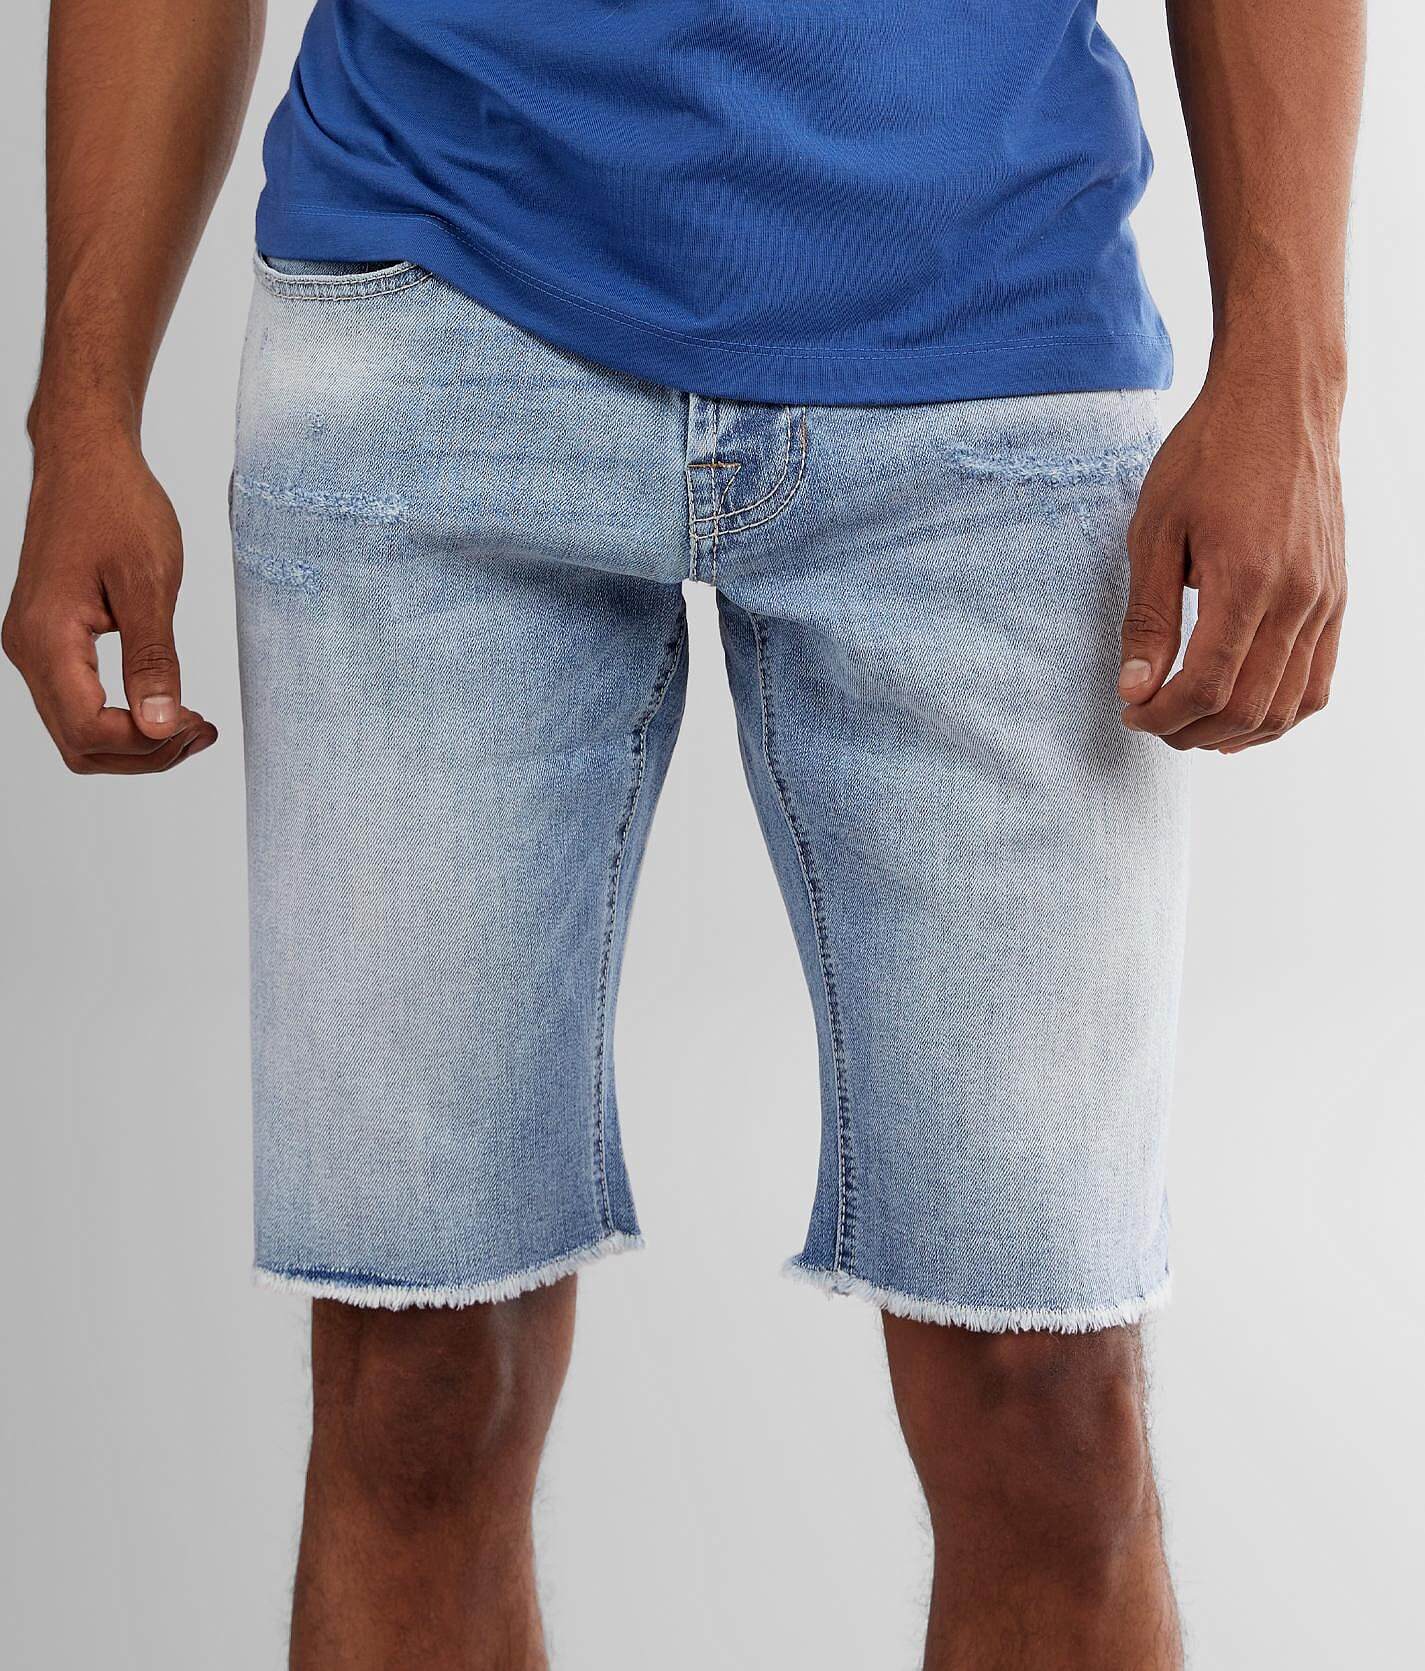 m and s denim shorts